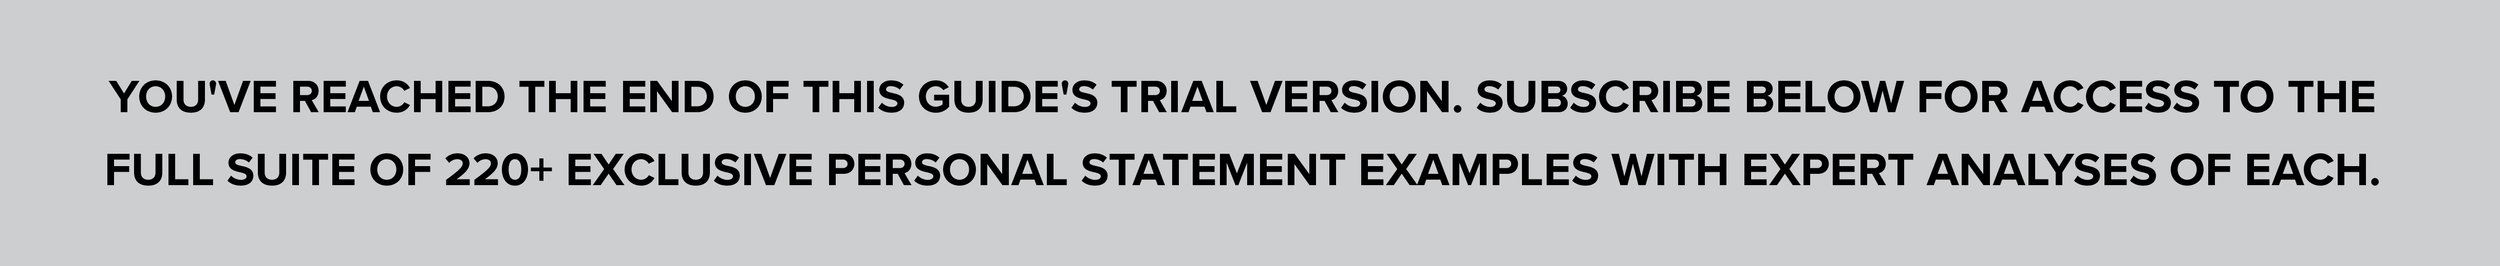 personal statement premium example and analysis hub gray trial banner